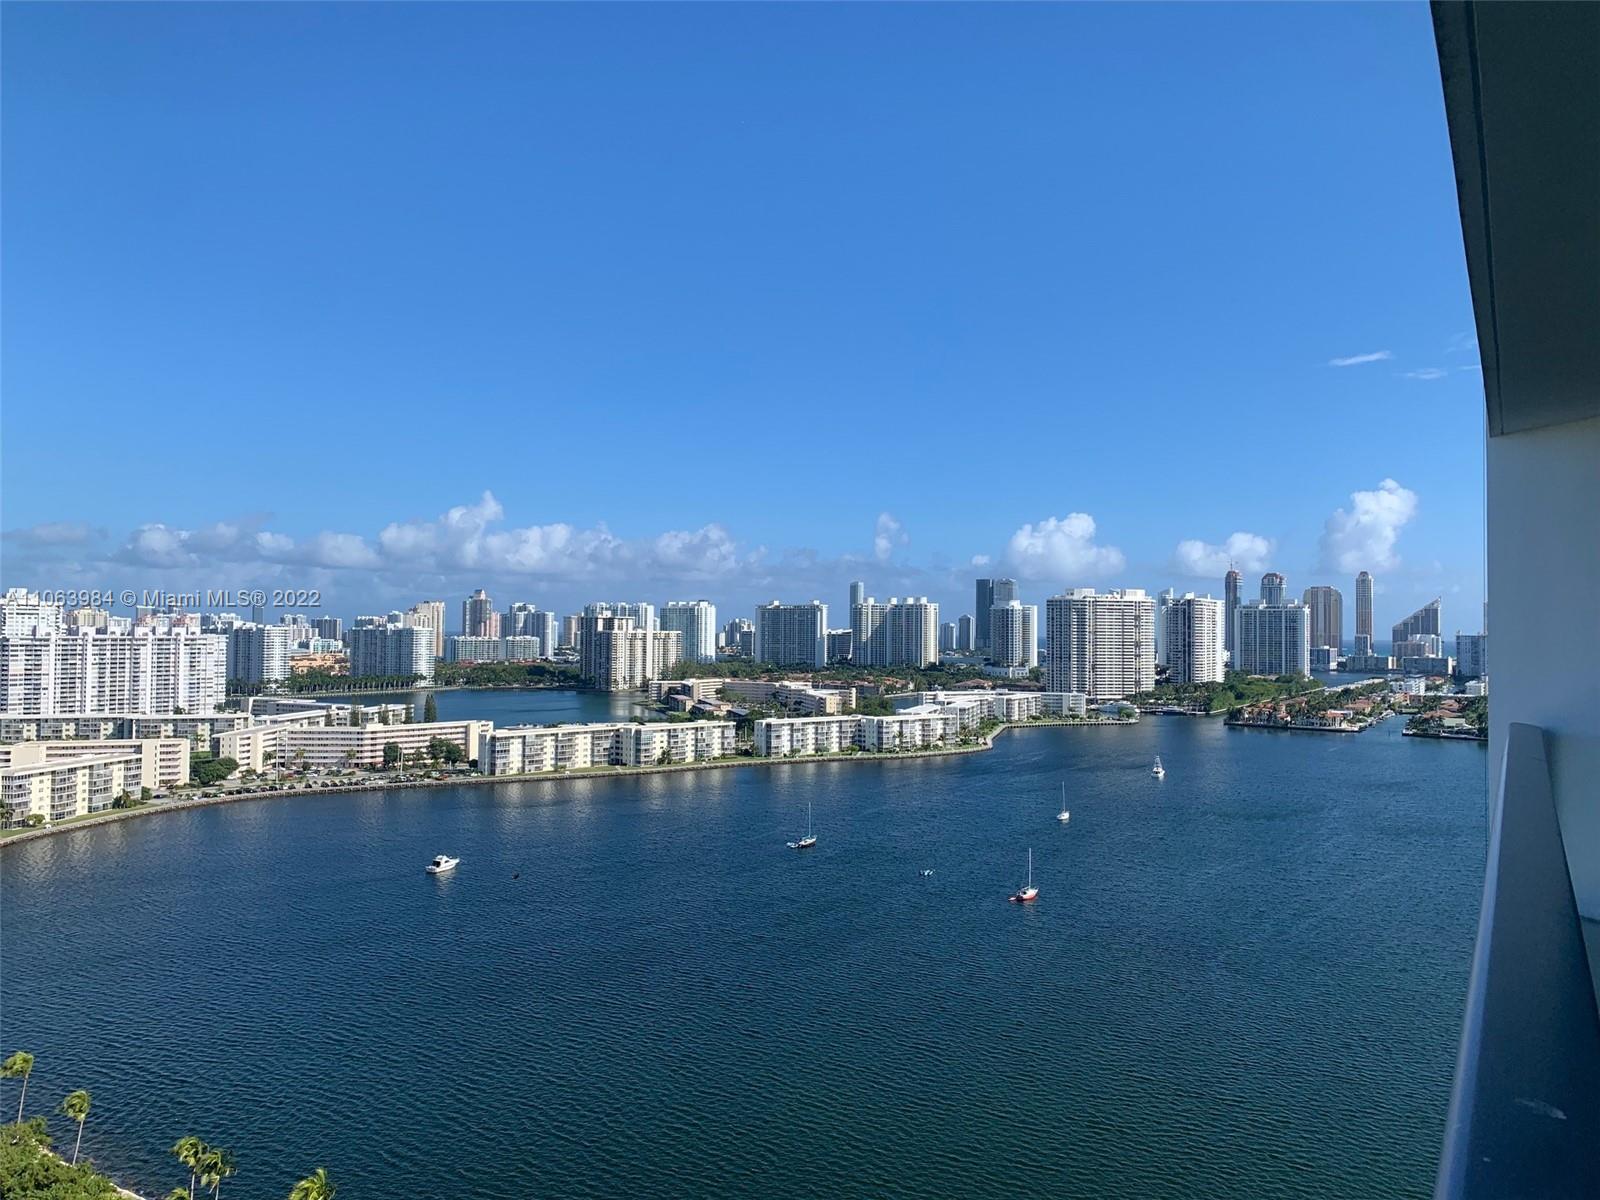 17301 Biscayne Blvd 2106, North Miami Beach, Florida 33160, 3 Bedrooms Bedrooms, ,3 BathroomsBathrooms,Residential,For Sale,17301 Biscayne Blvd 2106,A11063984